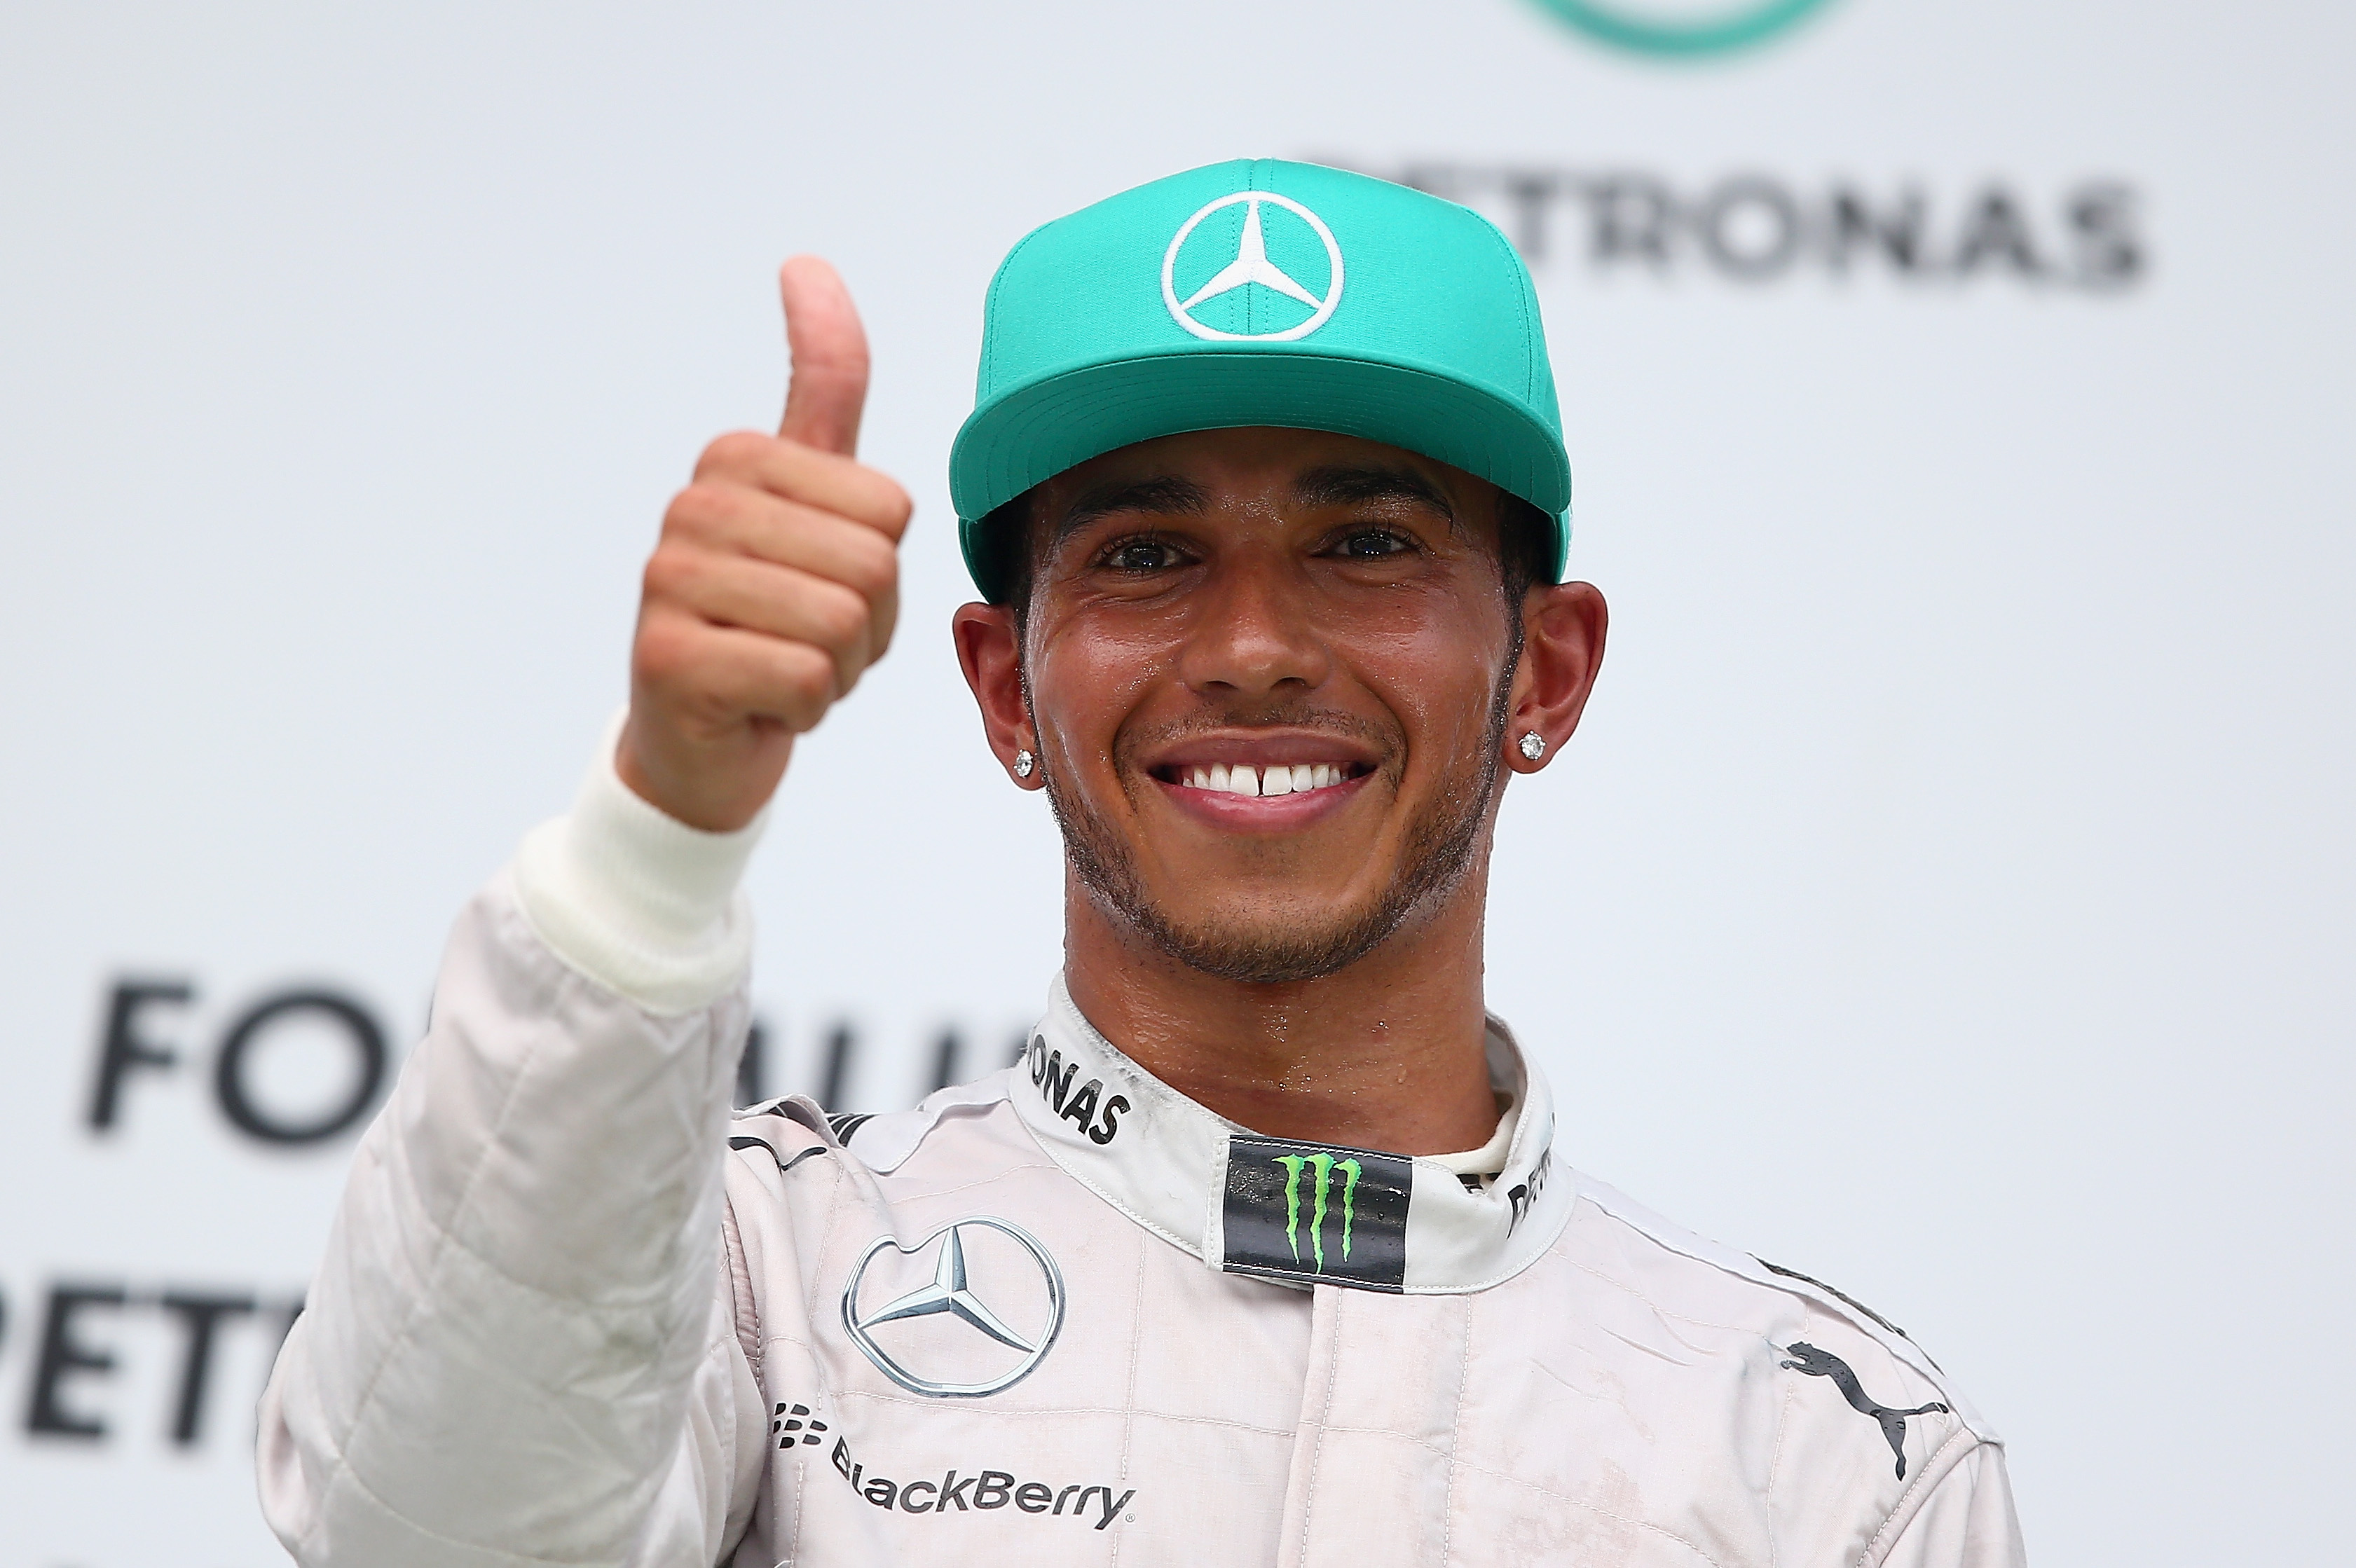 Lewis Hamilton - Lewis Hamilton | Known people - famous people news and ...